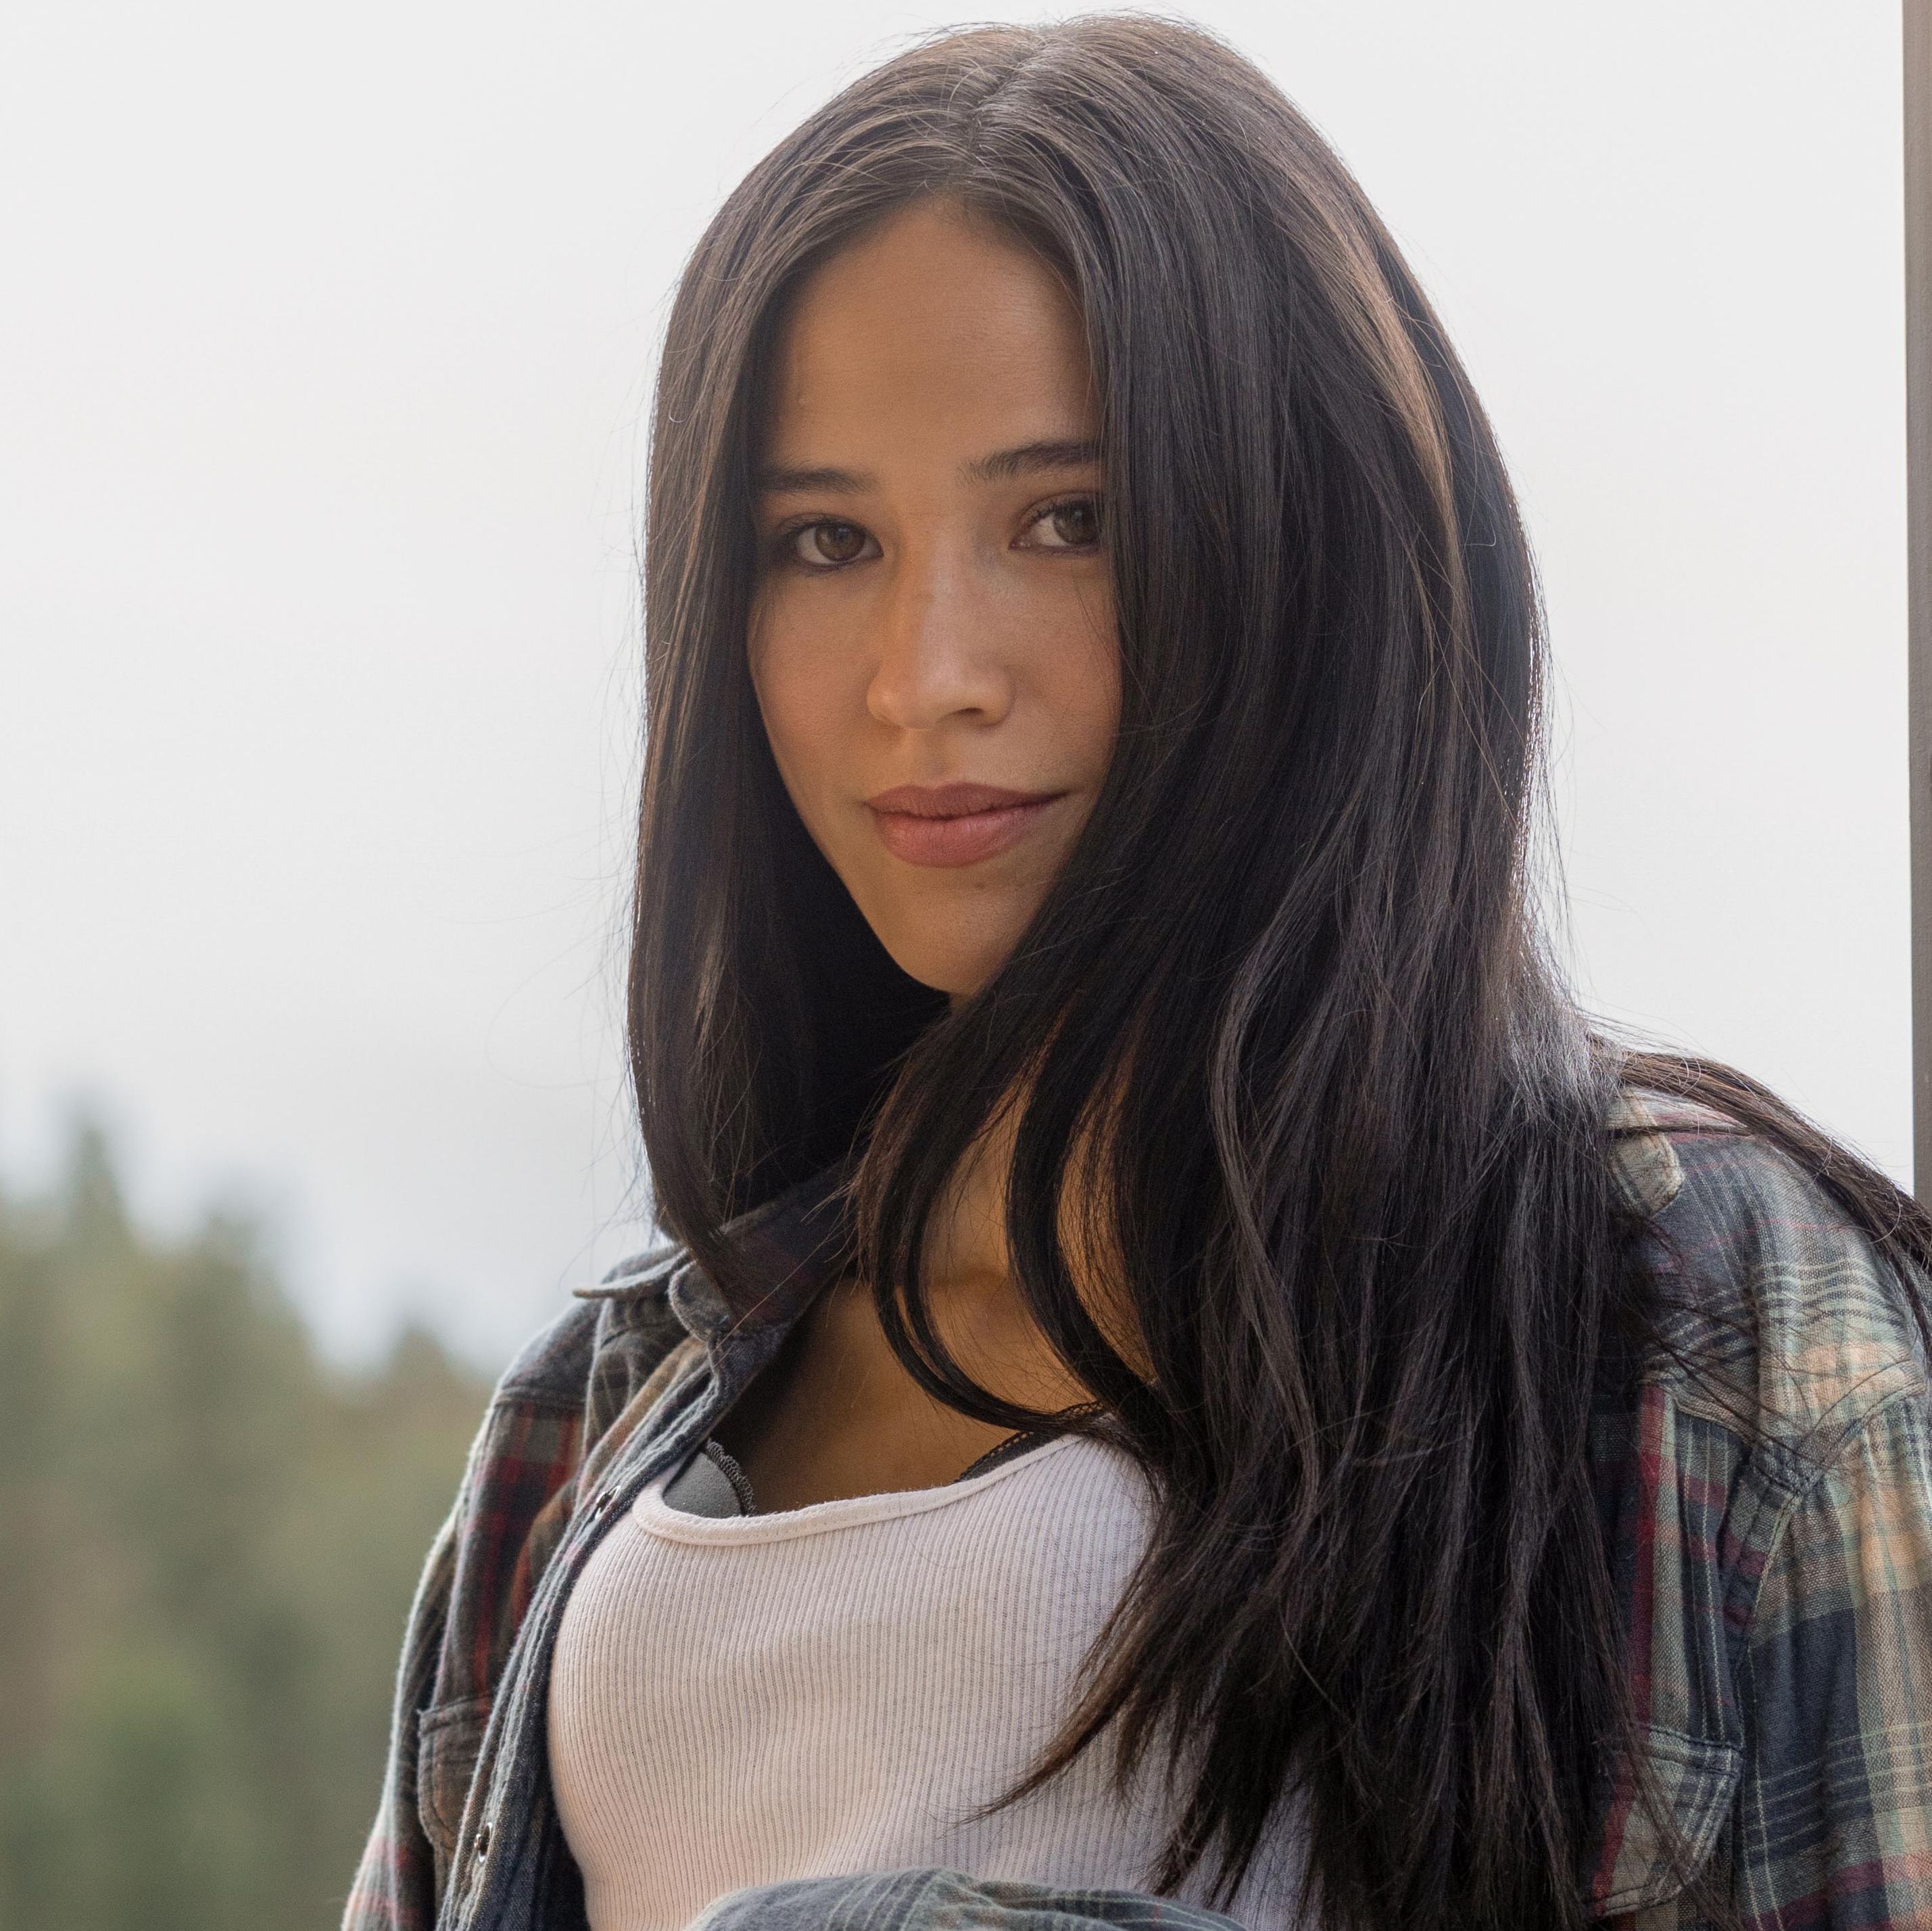 'Yellowstone' Fans Are Freaking Out Over Kelsey Asbille's Behind-the-Scenes Photos From Set